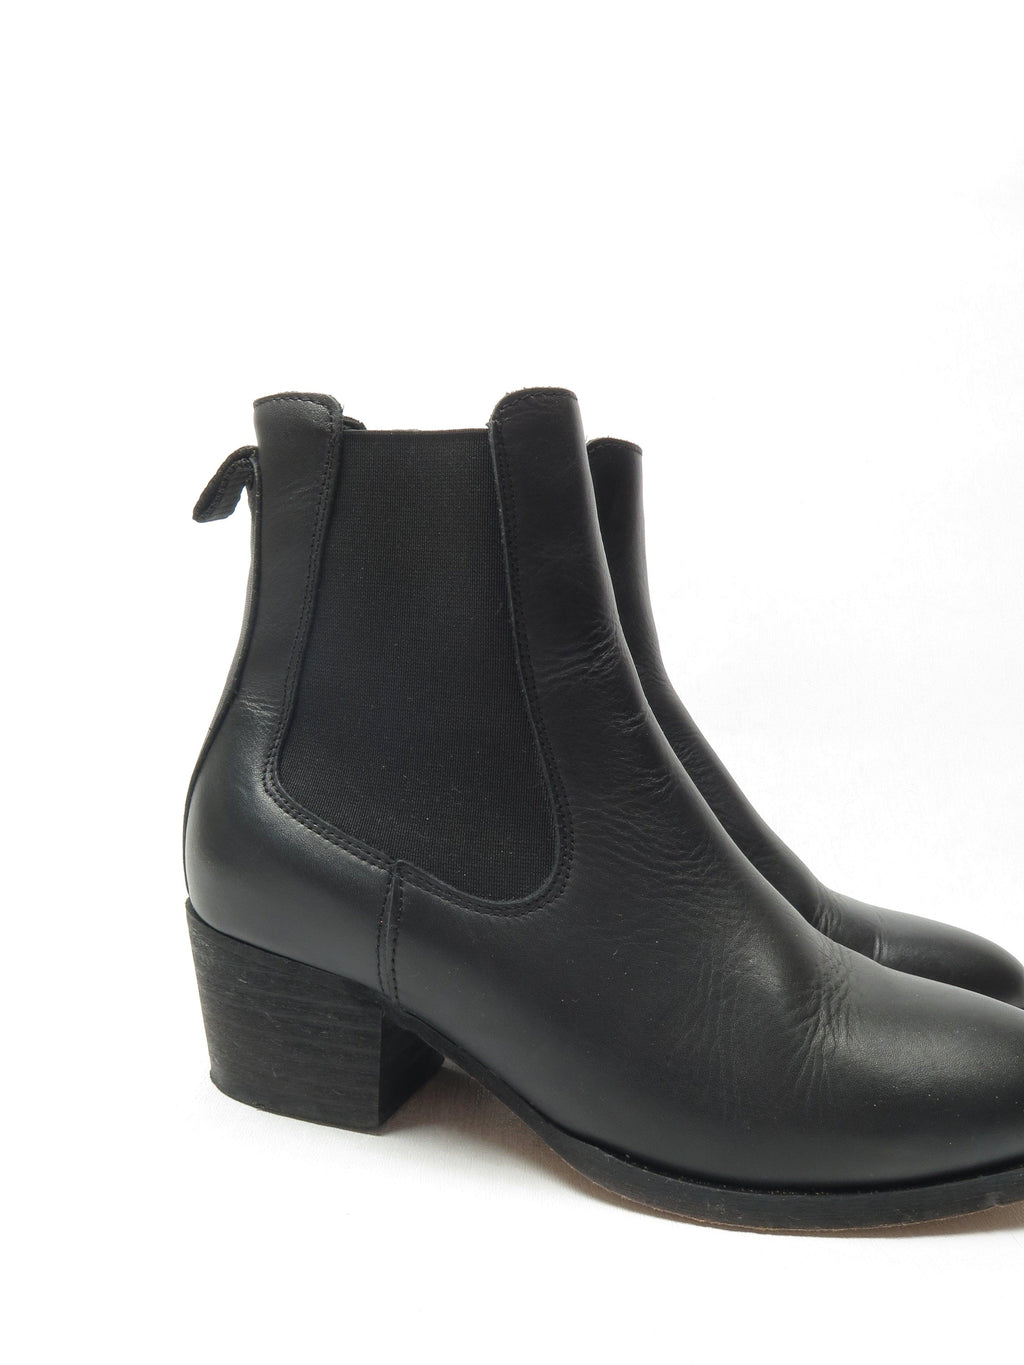 Black Leather Clarks Chelsea Boots 4/37 - The Harlequin